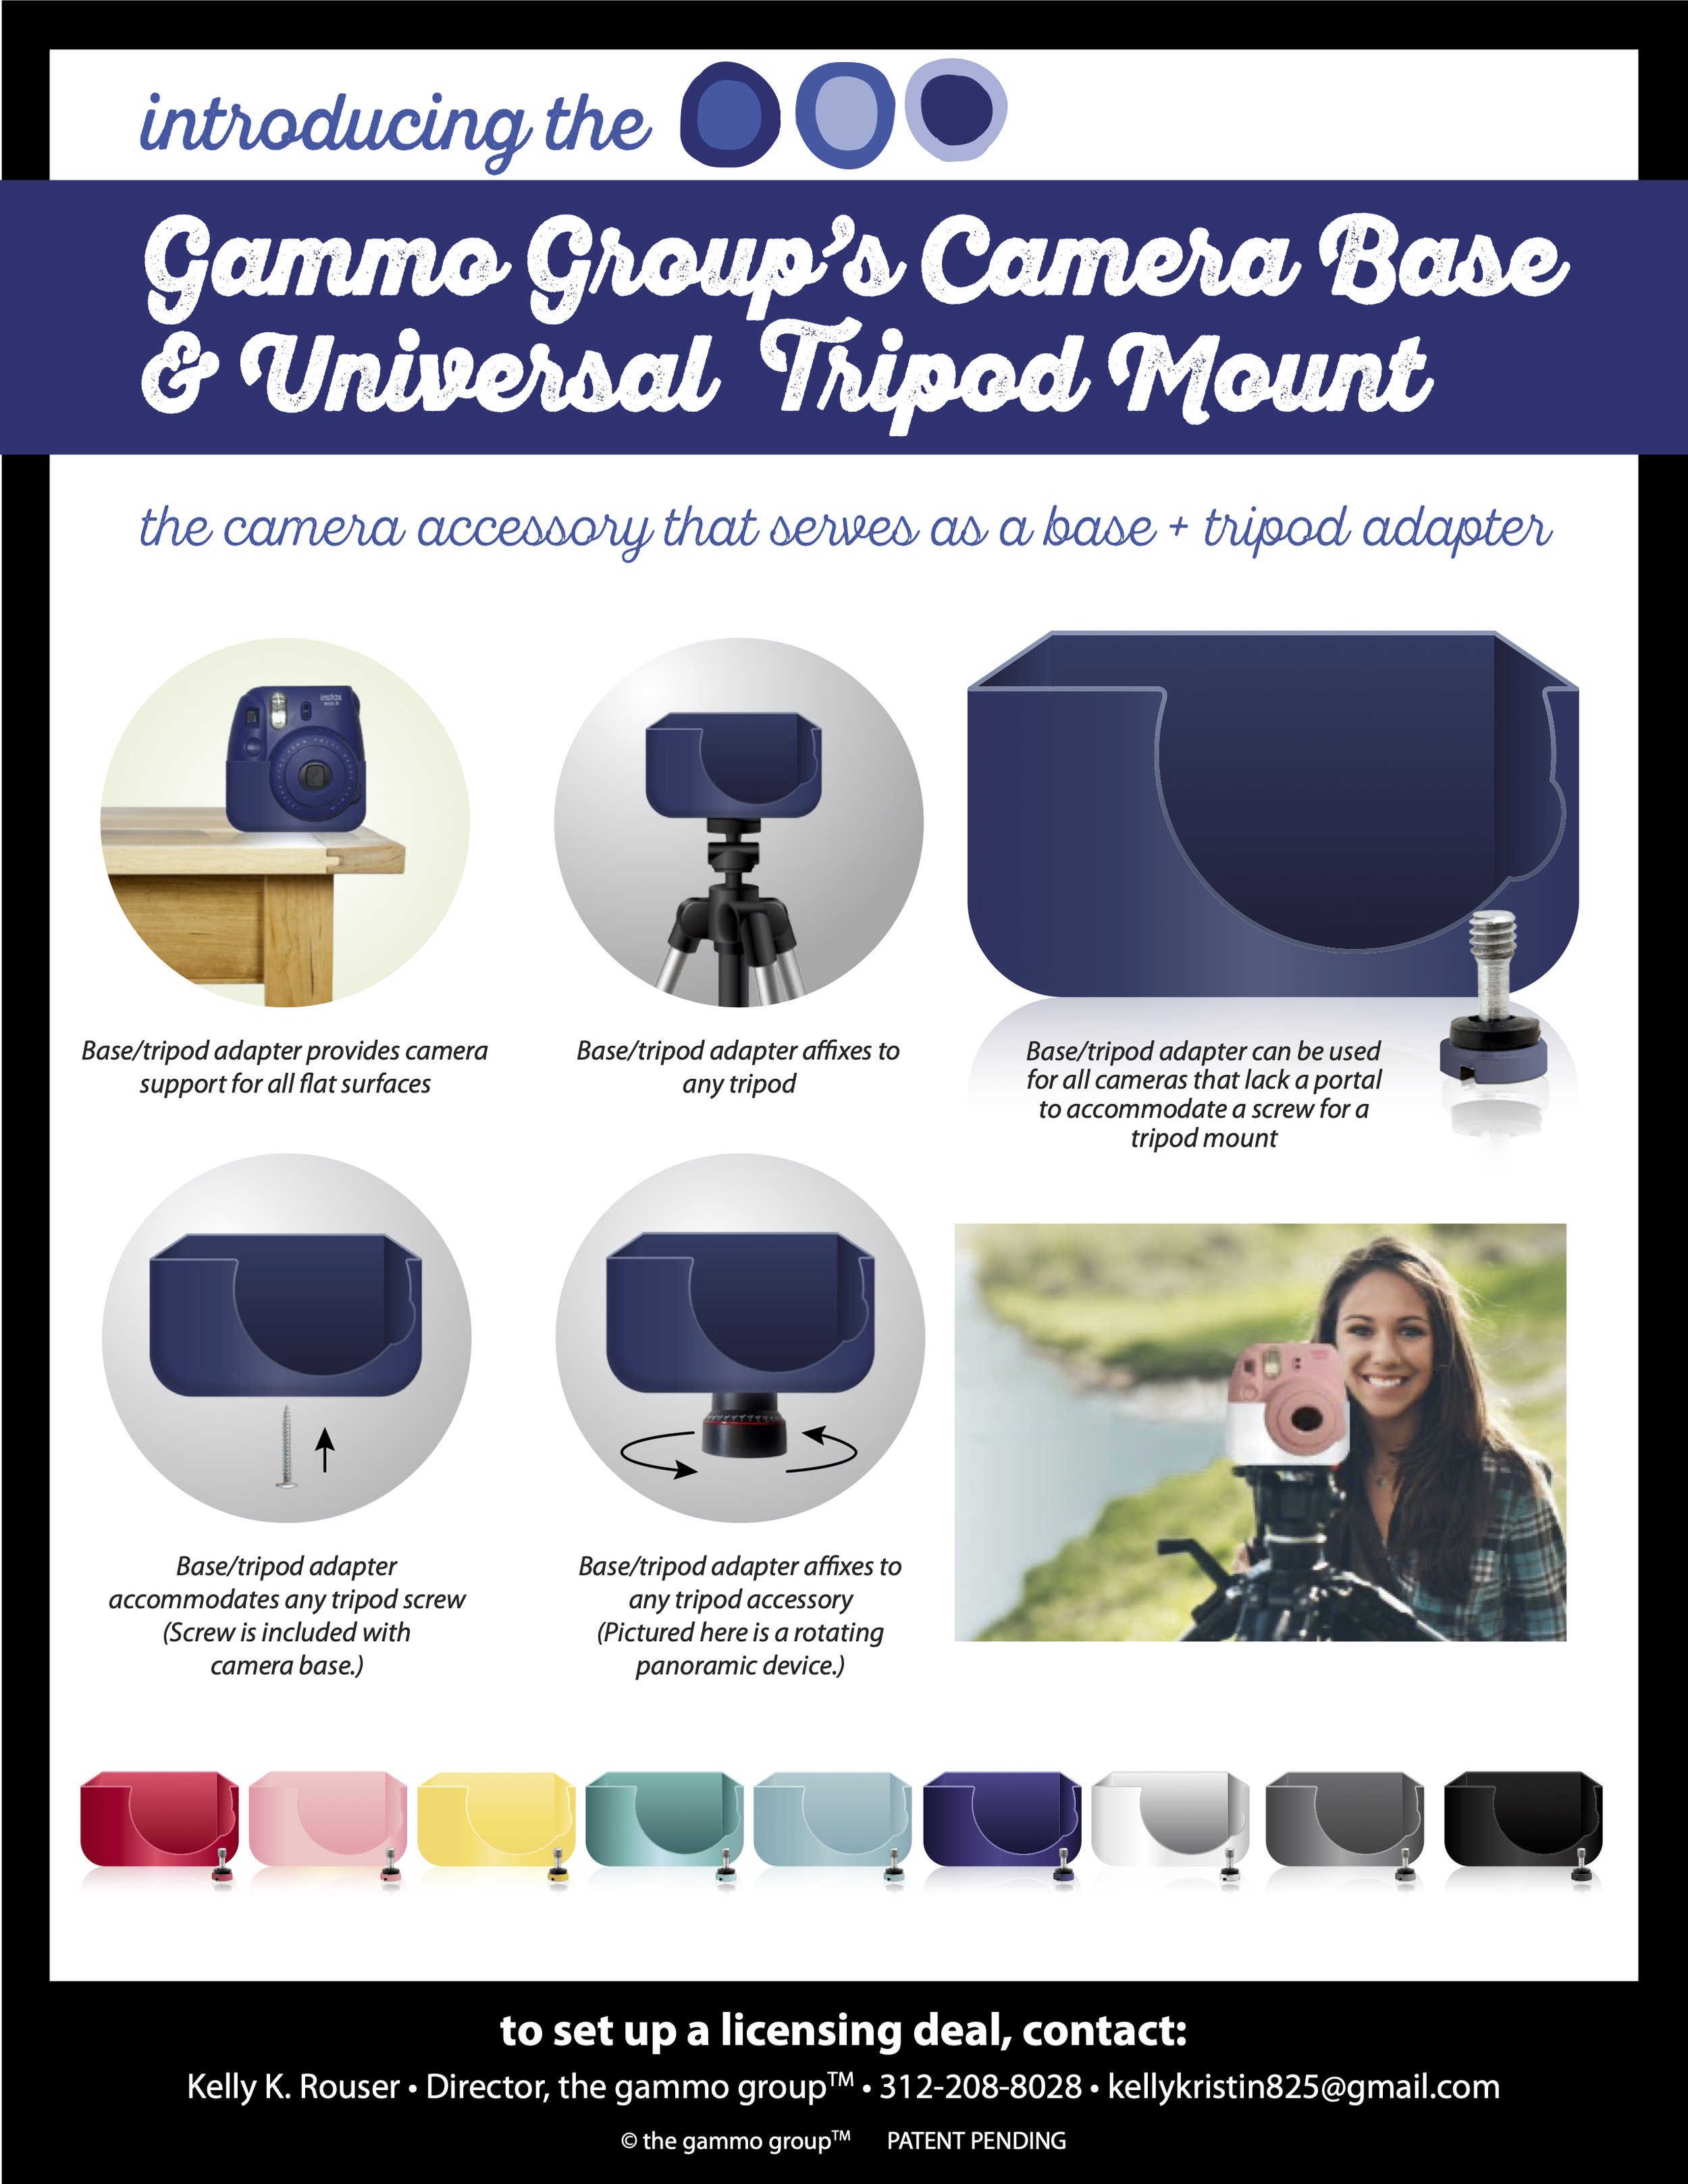 Sell Sheet for the Camera Base & Universal Tripod Mount